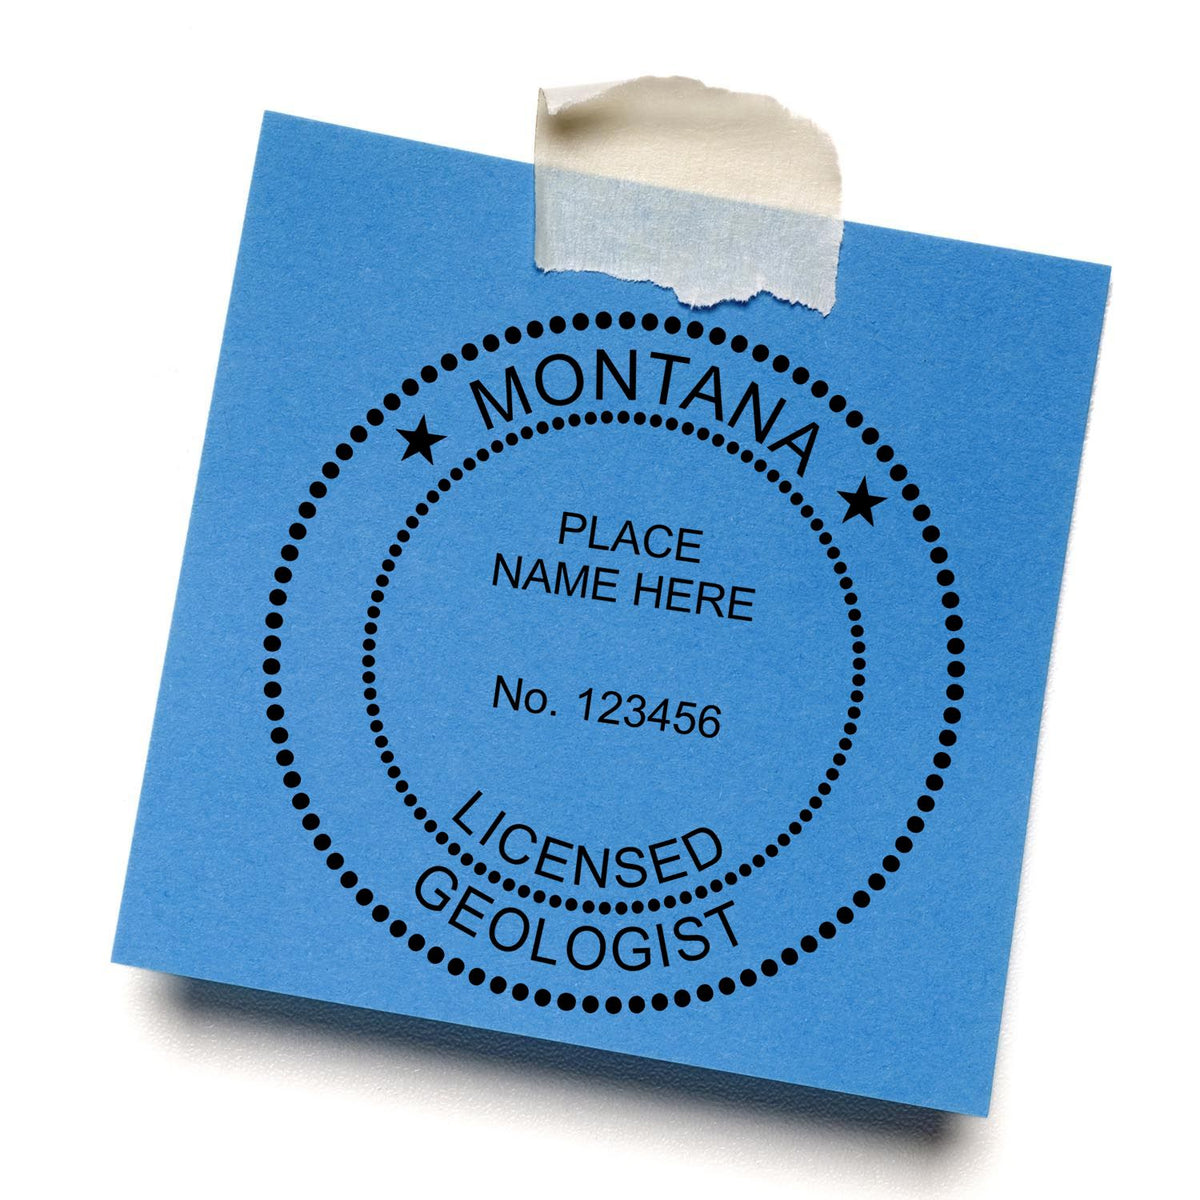 The Montana Professional Geologist Seal Stamp stamp impression comes to life with a crisp, detailed image stamped on paper - showcasing true professional quality.